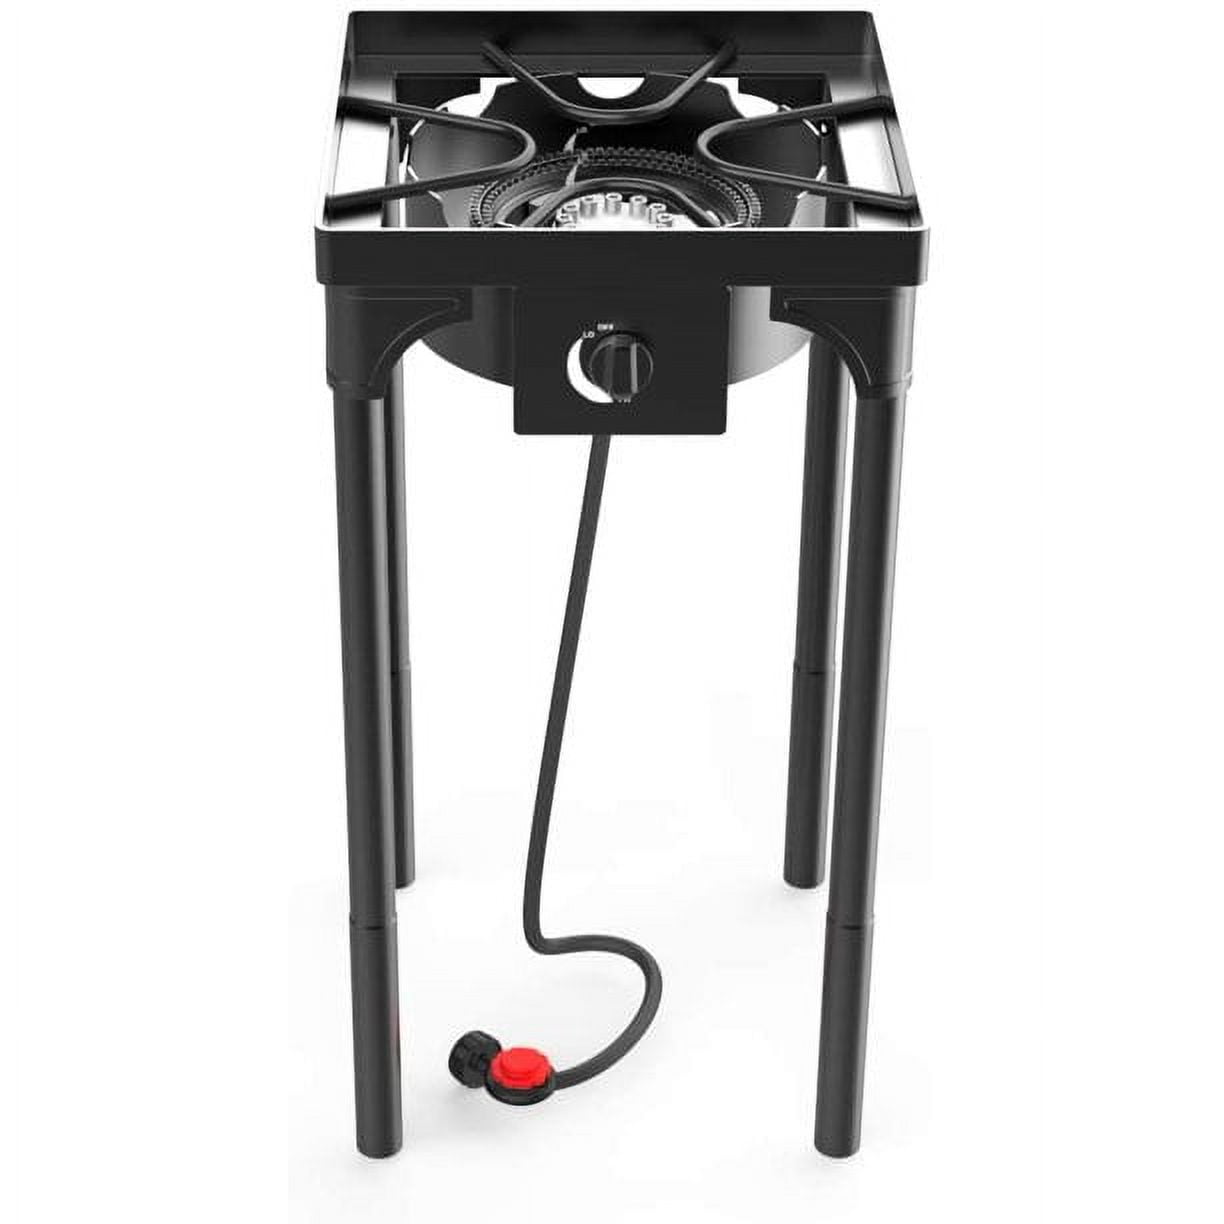 Kapas Outdoor & Indoor Portable Propane Stove, Single Burners with GAS Premium Hose, Detachable Legs for Backyard Kitchen, Camping Grill, Hiking